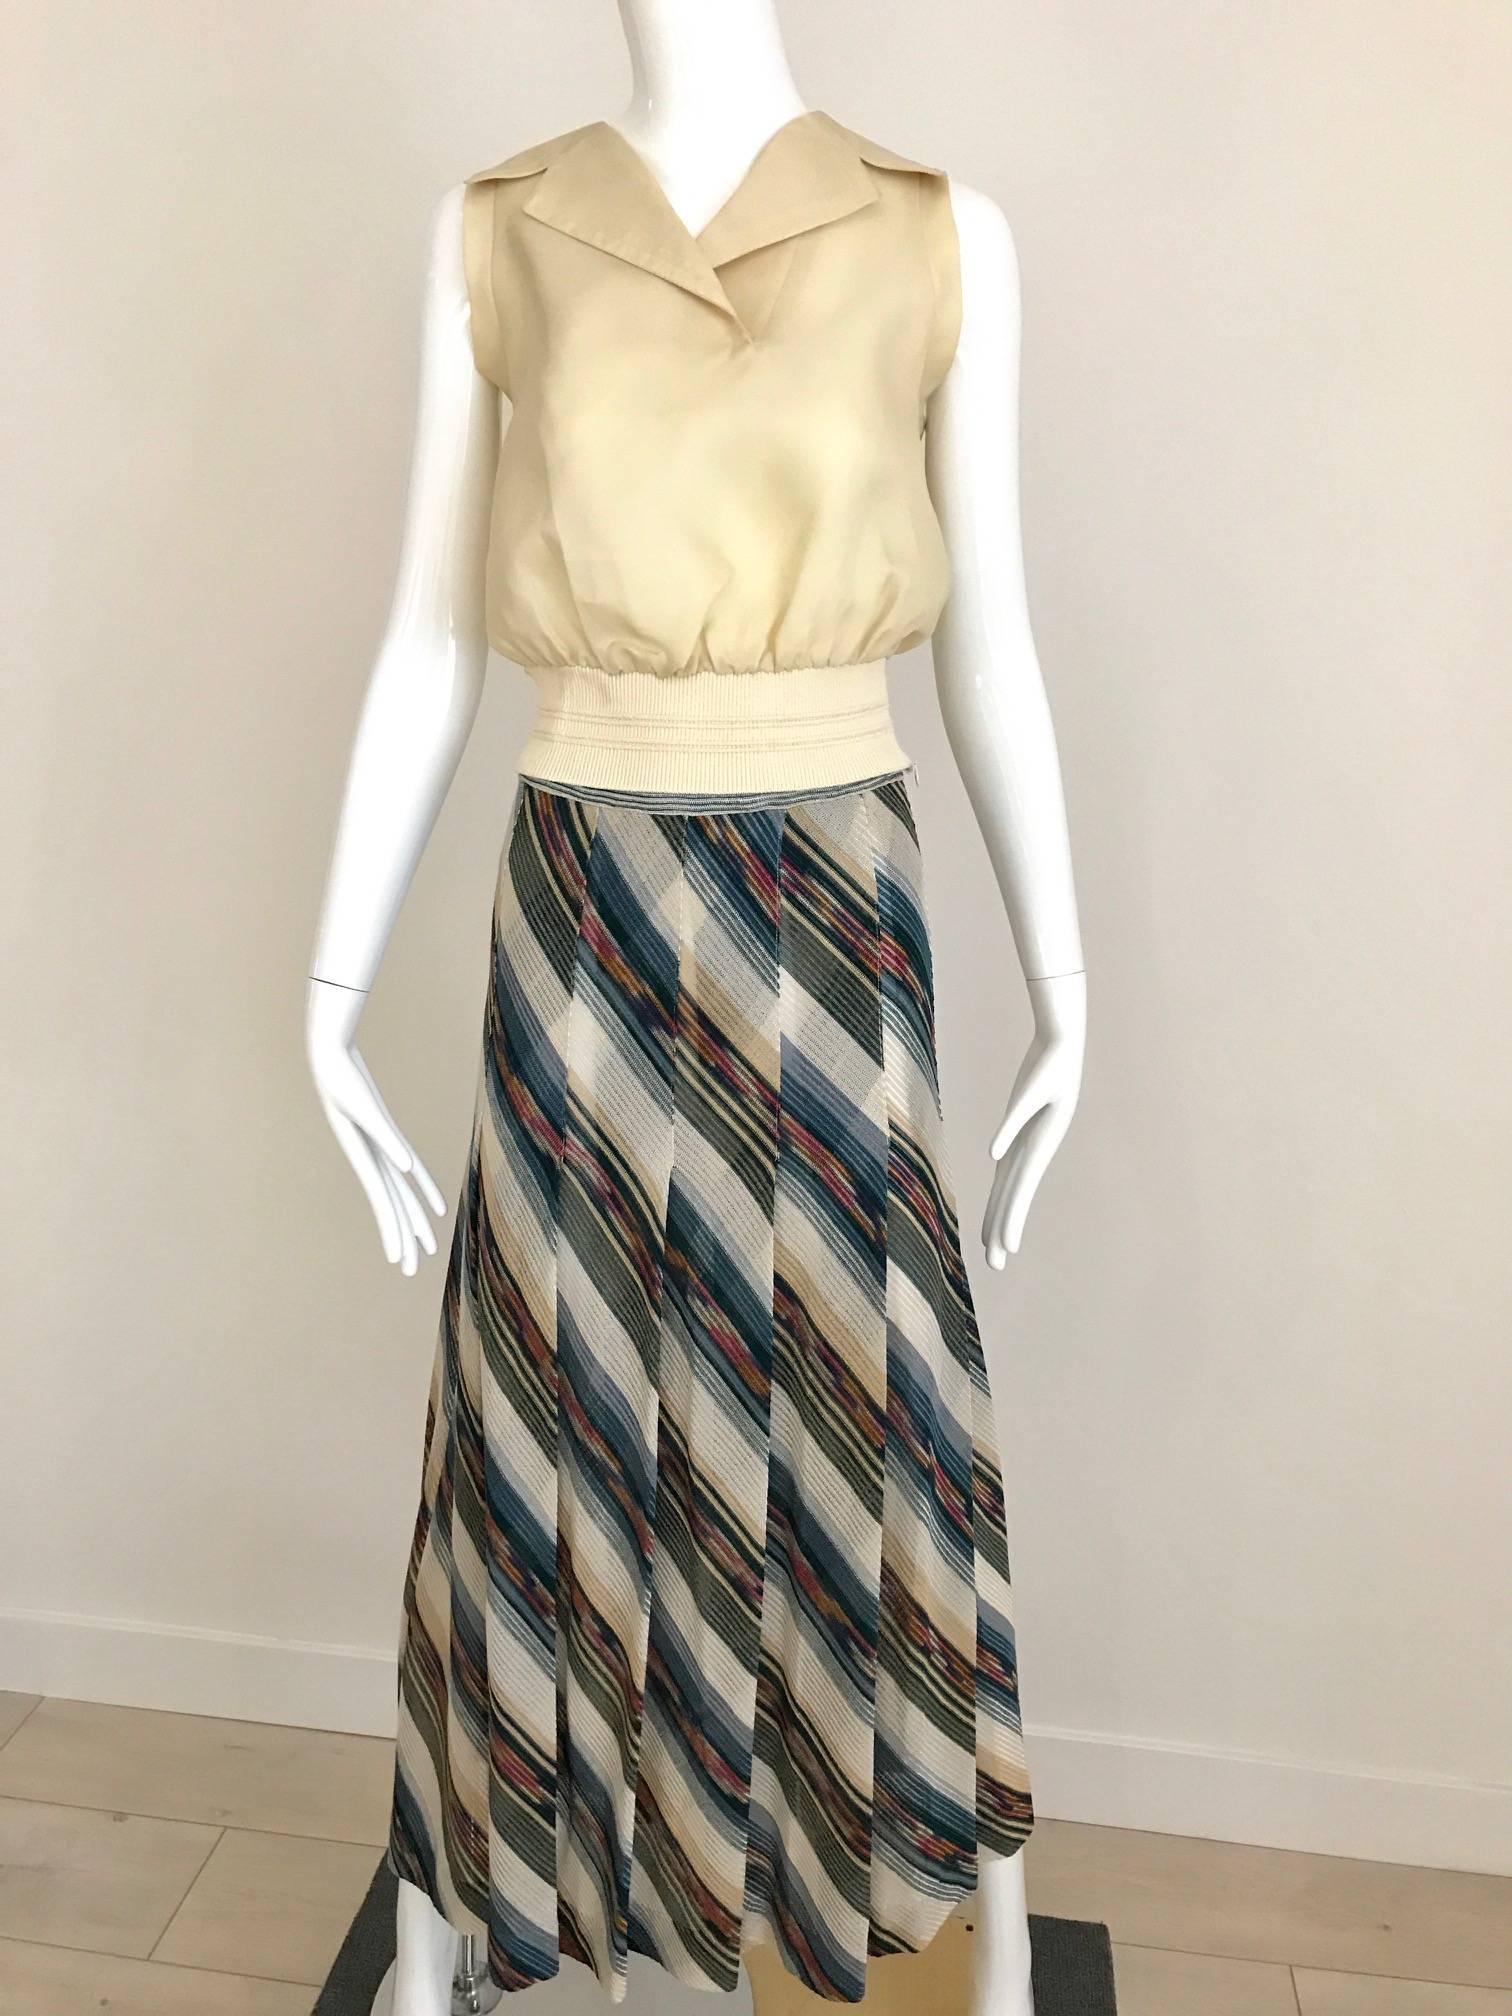 This vintage 1970s Missoni diagonal stripe knit maxi skirt has a subtle rainbow of colors. Beige, blue, teal, gold, orange, raspberry in a soft beautiful knit, results in a very sophisticated look. Perfect for vacation wear that will not wrinkle and